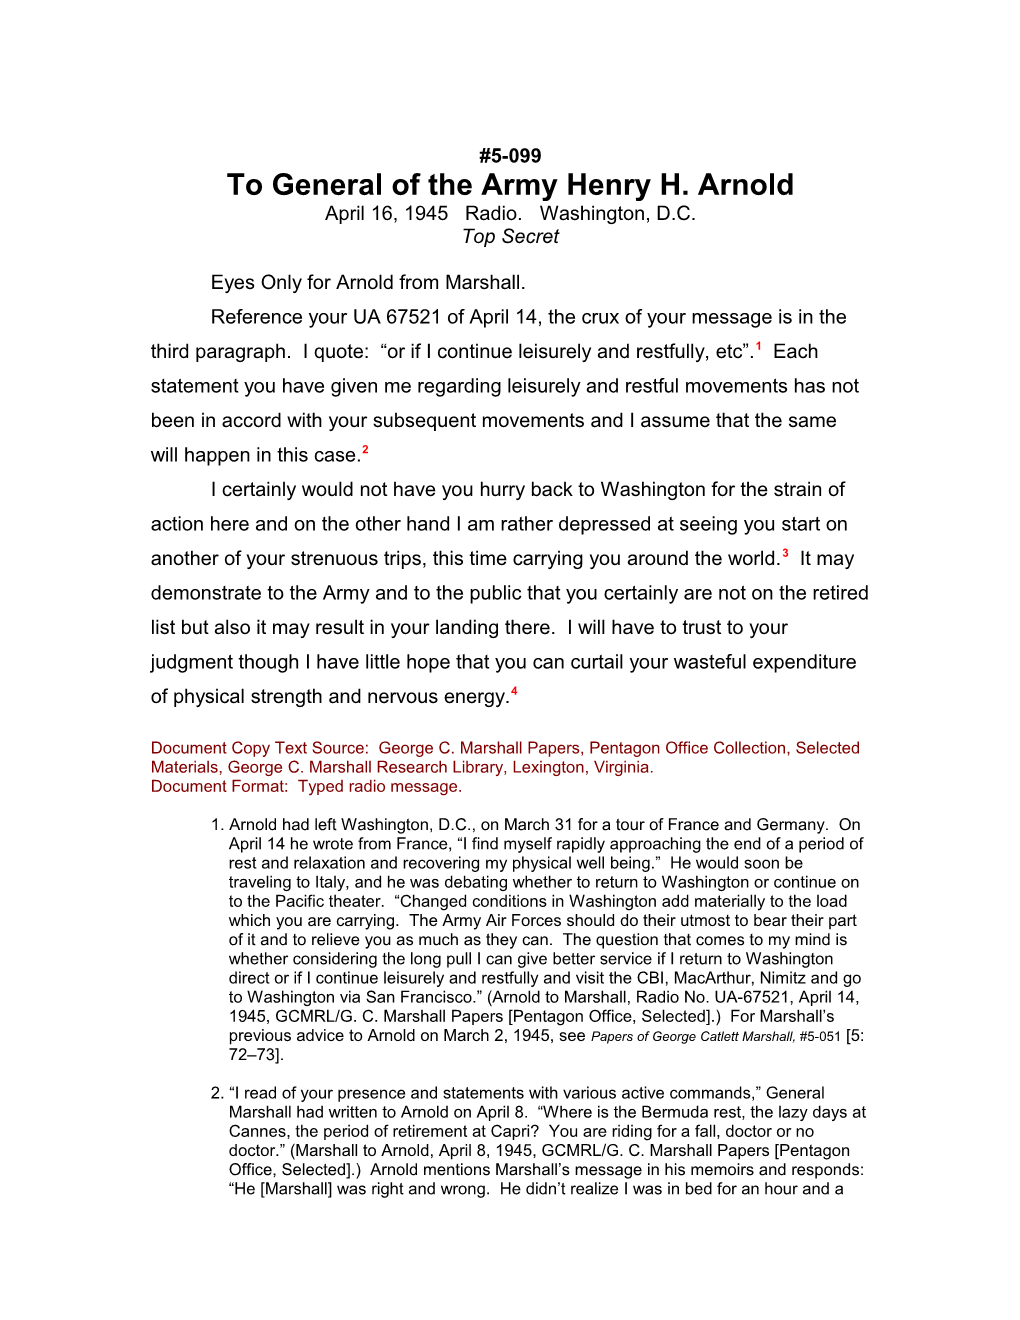 To General of the Army Henry H. Arnold